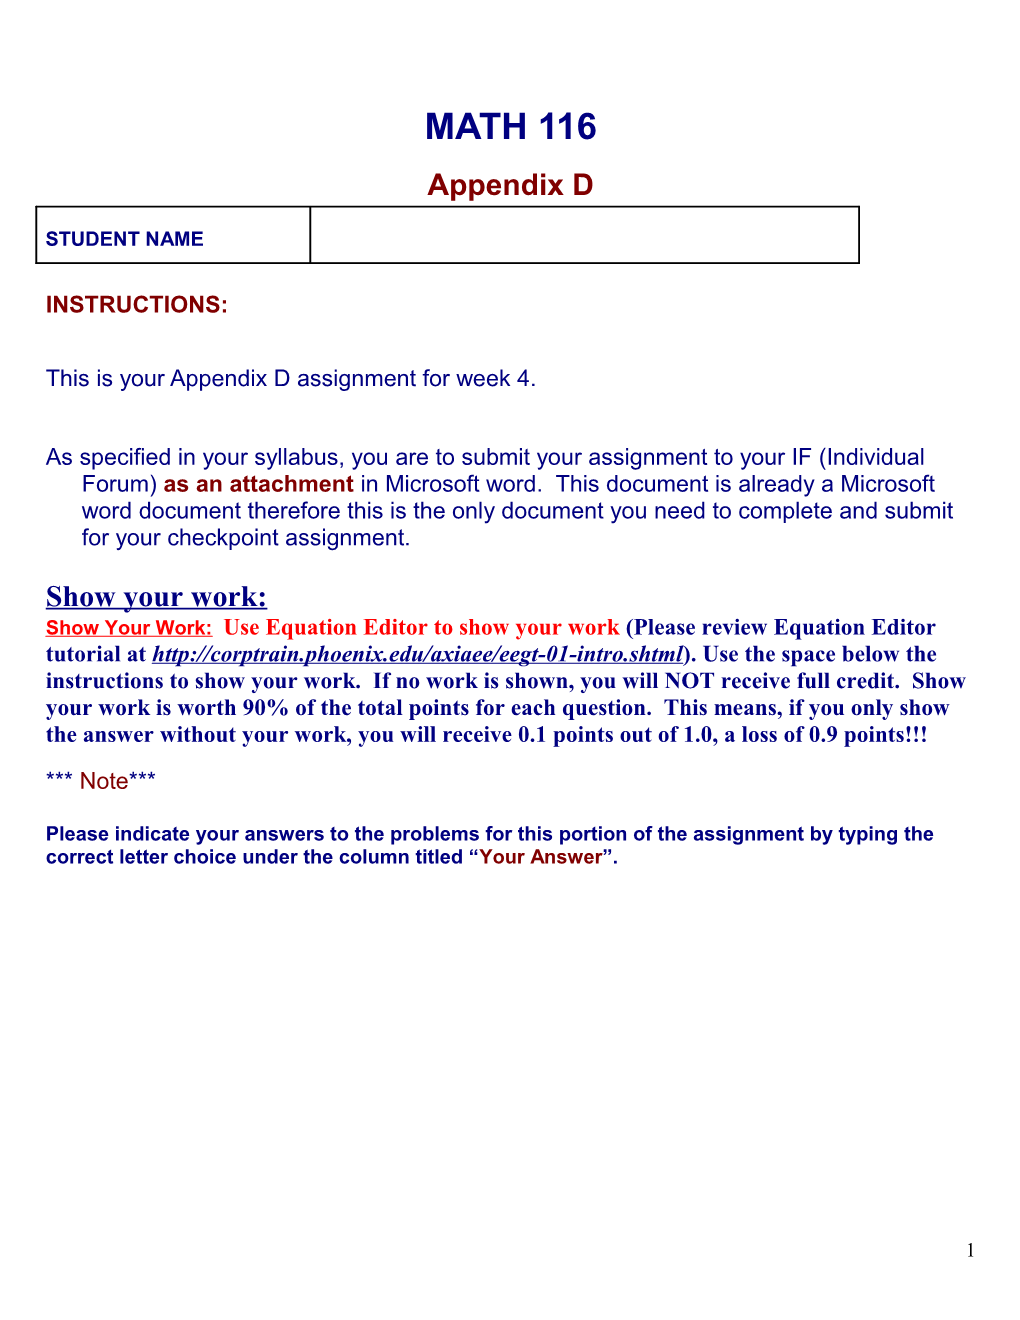 This Is Your Appendix D Assignment for Week 4